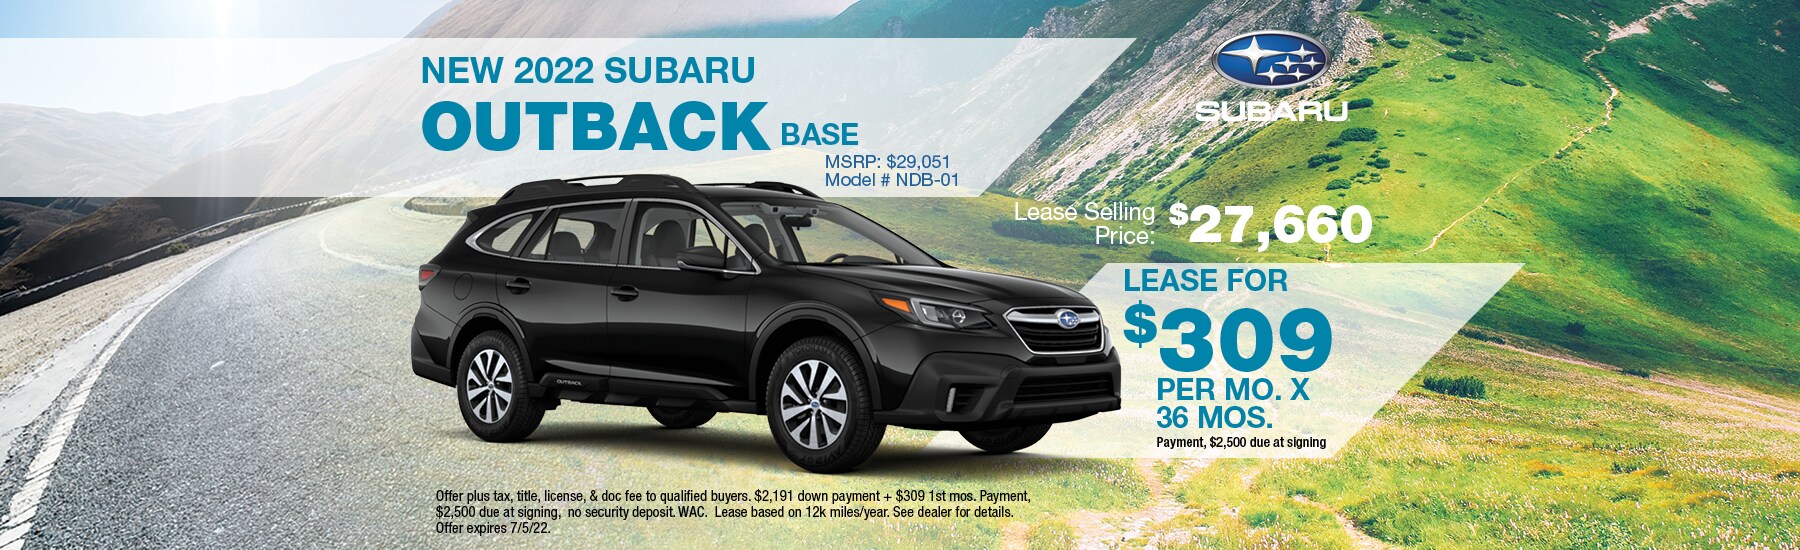 2022 Subaru Outback lease for $309 per month for 36 months with $2,500 due at signing - Lease selling price $27,660 - MSRP $29,051 and model number NDB-01